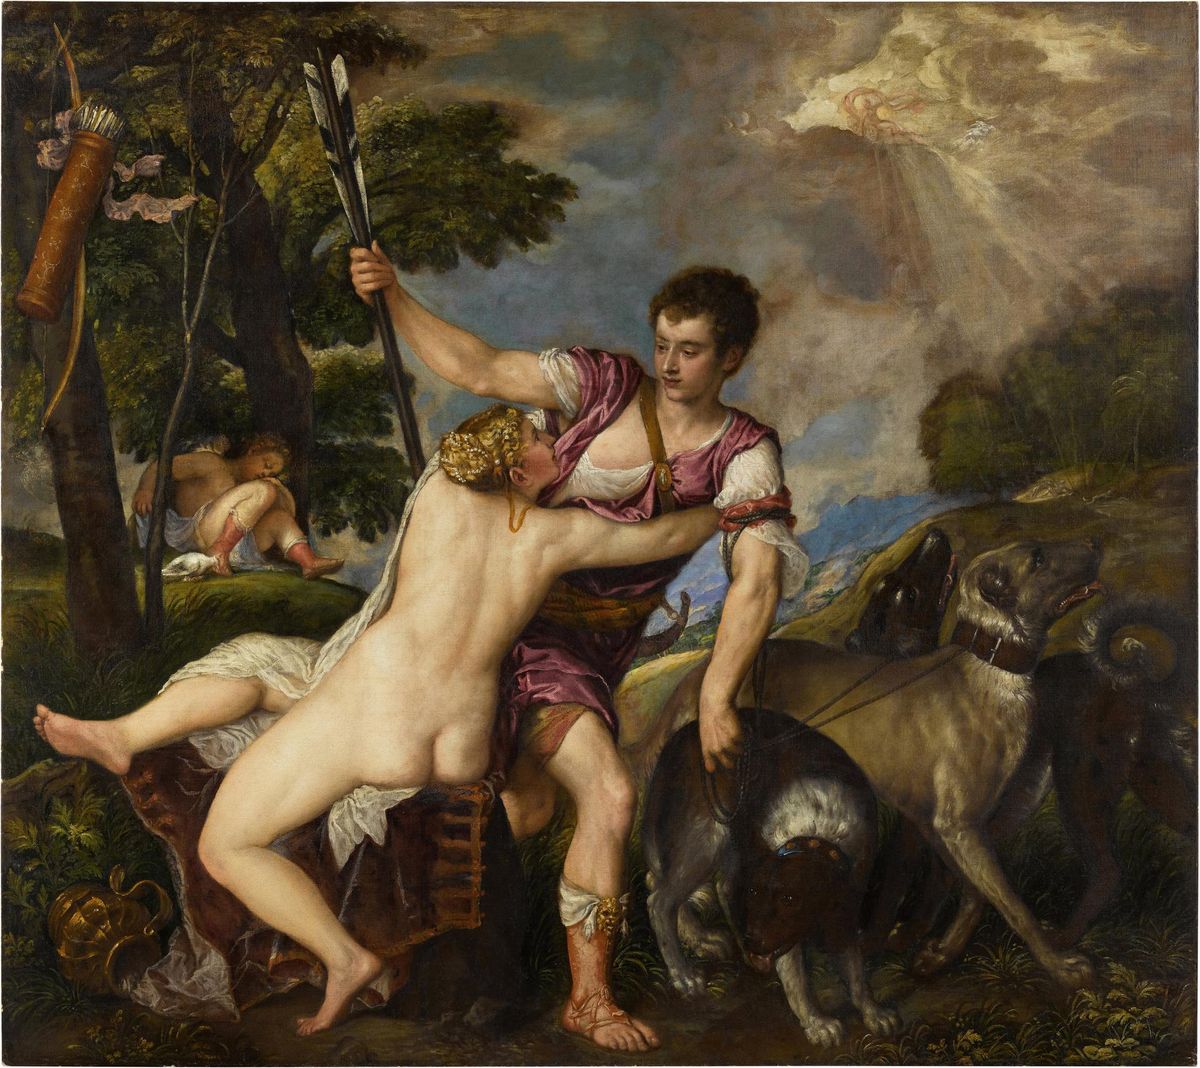 Titian and workshop's Venus and Adonis (around 1555-57)